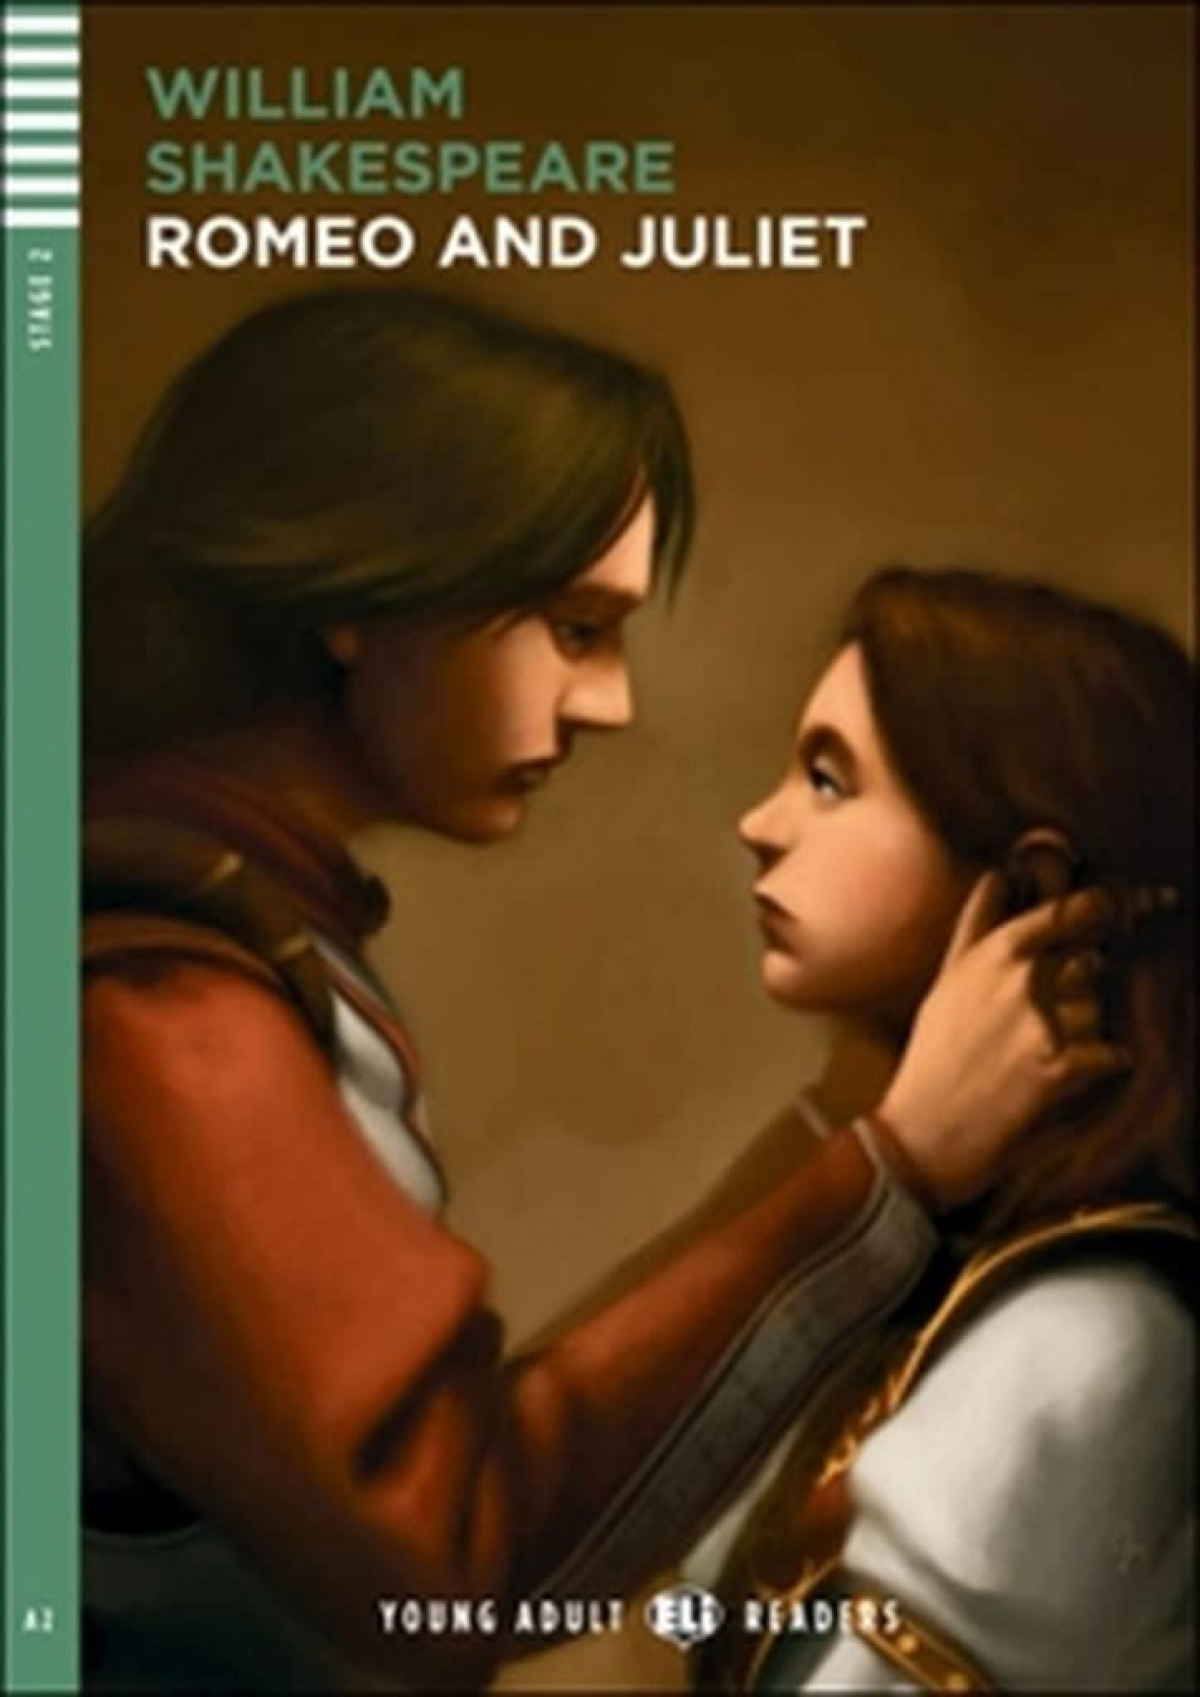 Romeo and juliet + cd a2 stage 2 young adult - Shakespeare, William